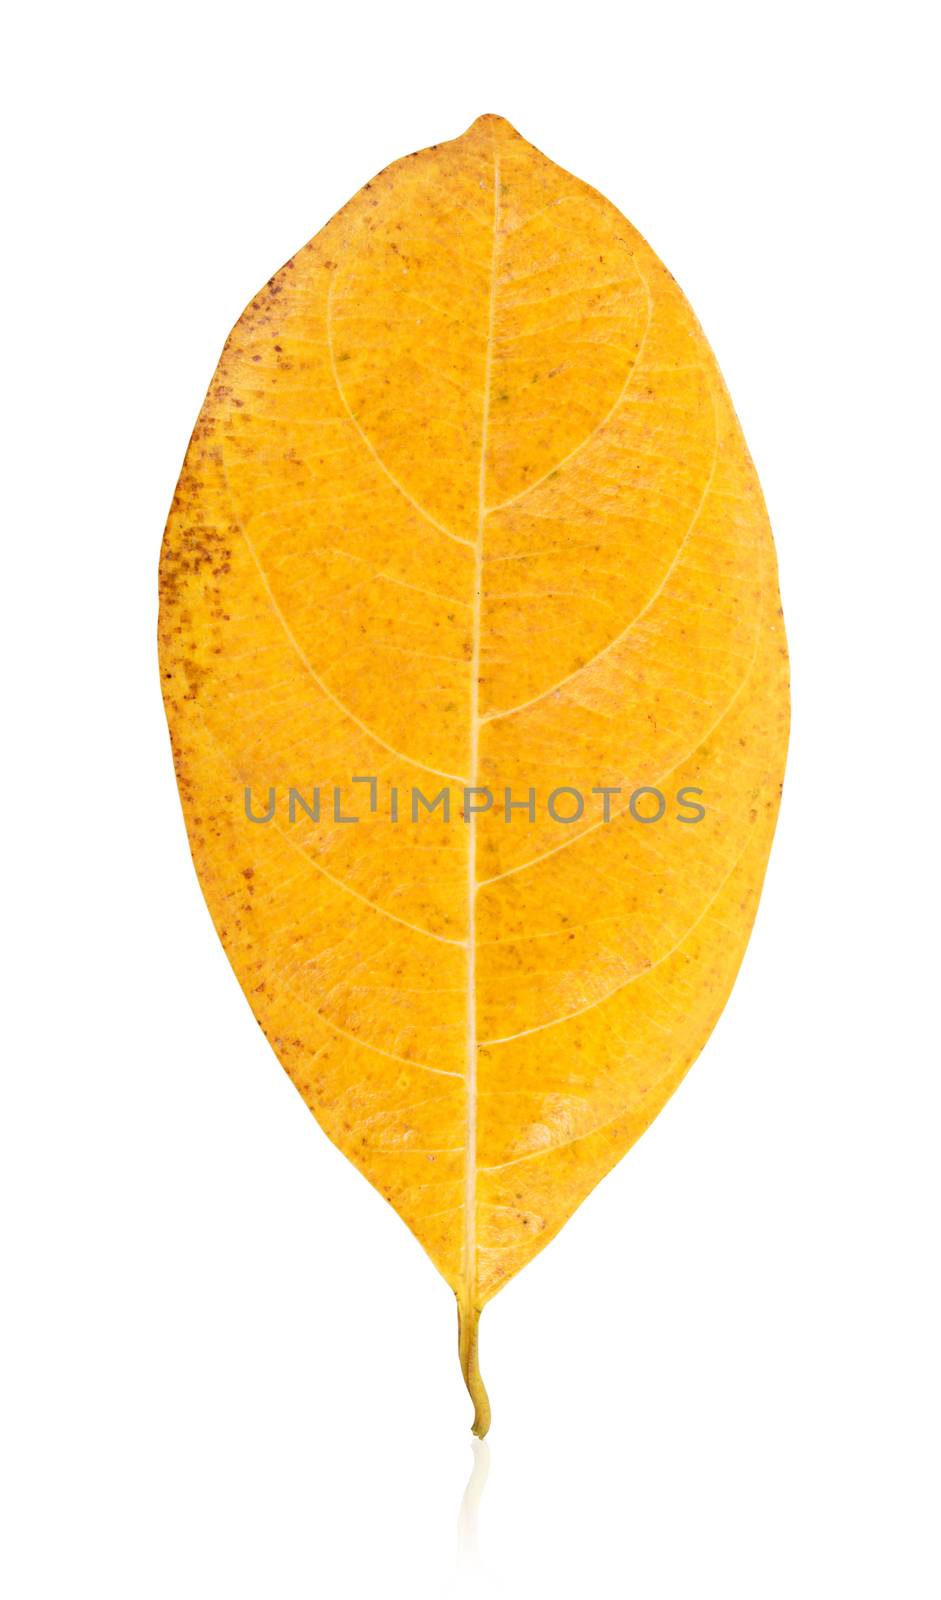 Ellipse yellow leaf shape isolated on white background, Save clipping path.